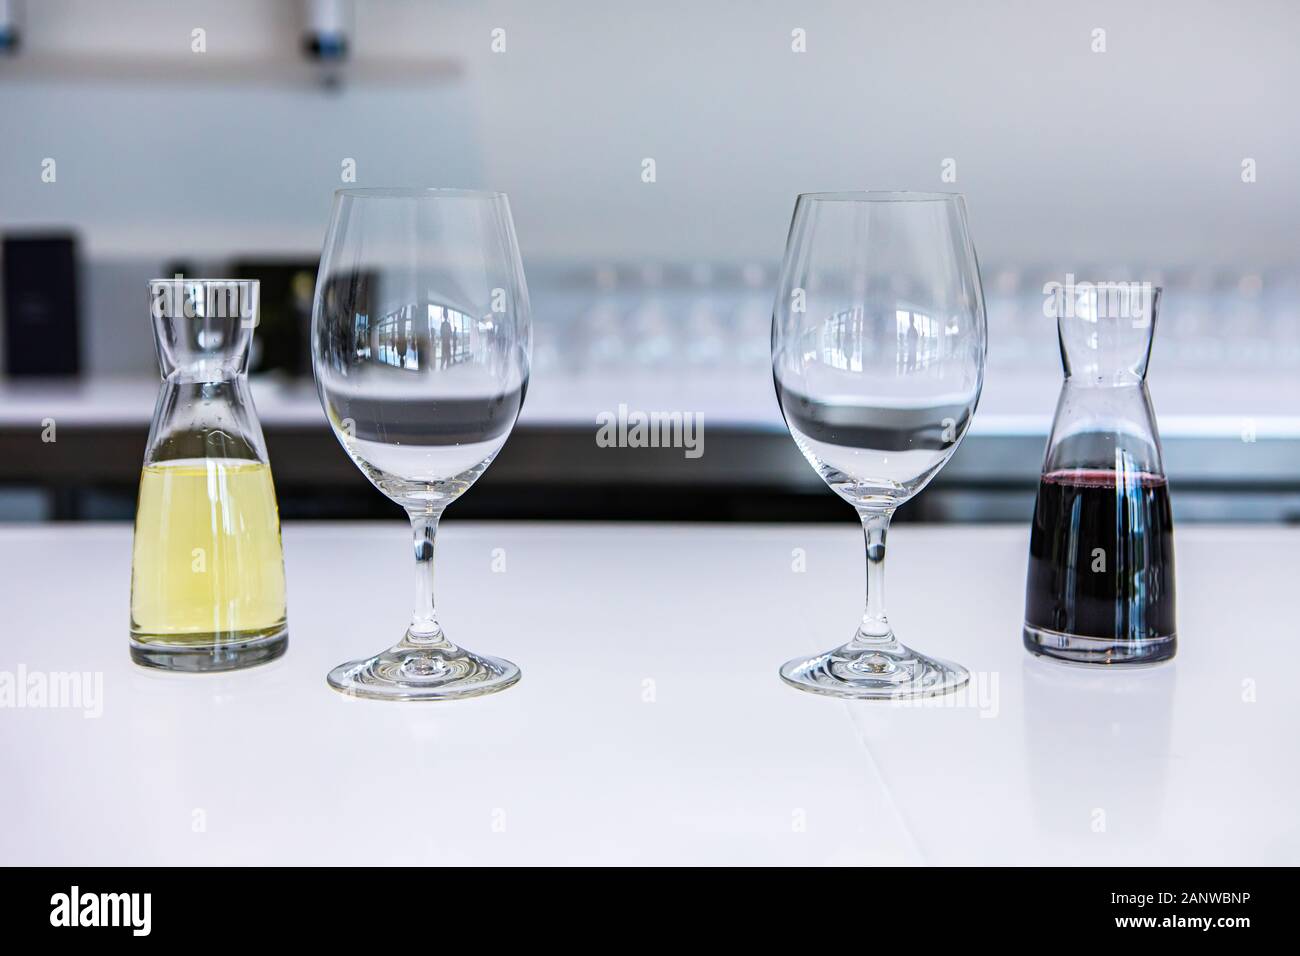 two empty wine glasses and a pair of small decanters filled with white and red wines, taste stemware on a bright white bar counter of the tasting room Stock Photo